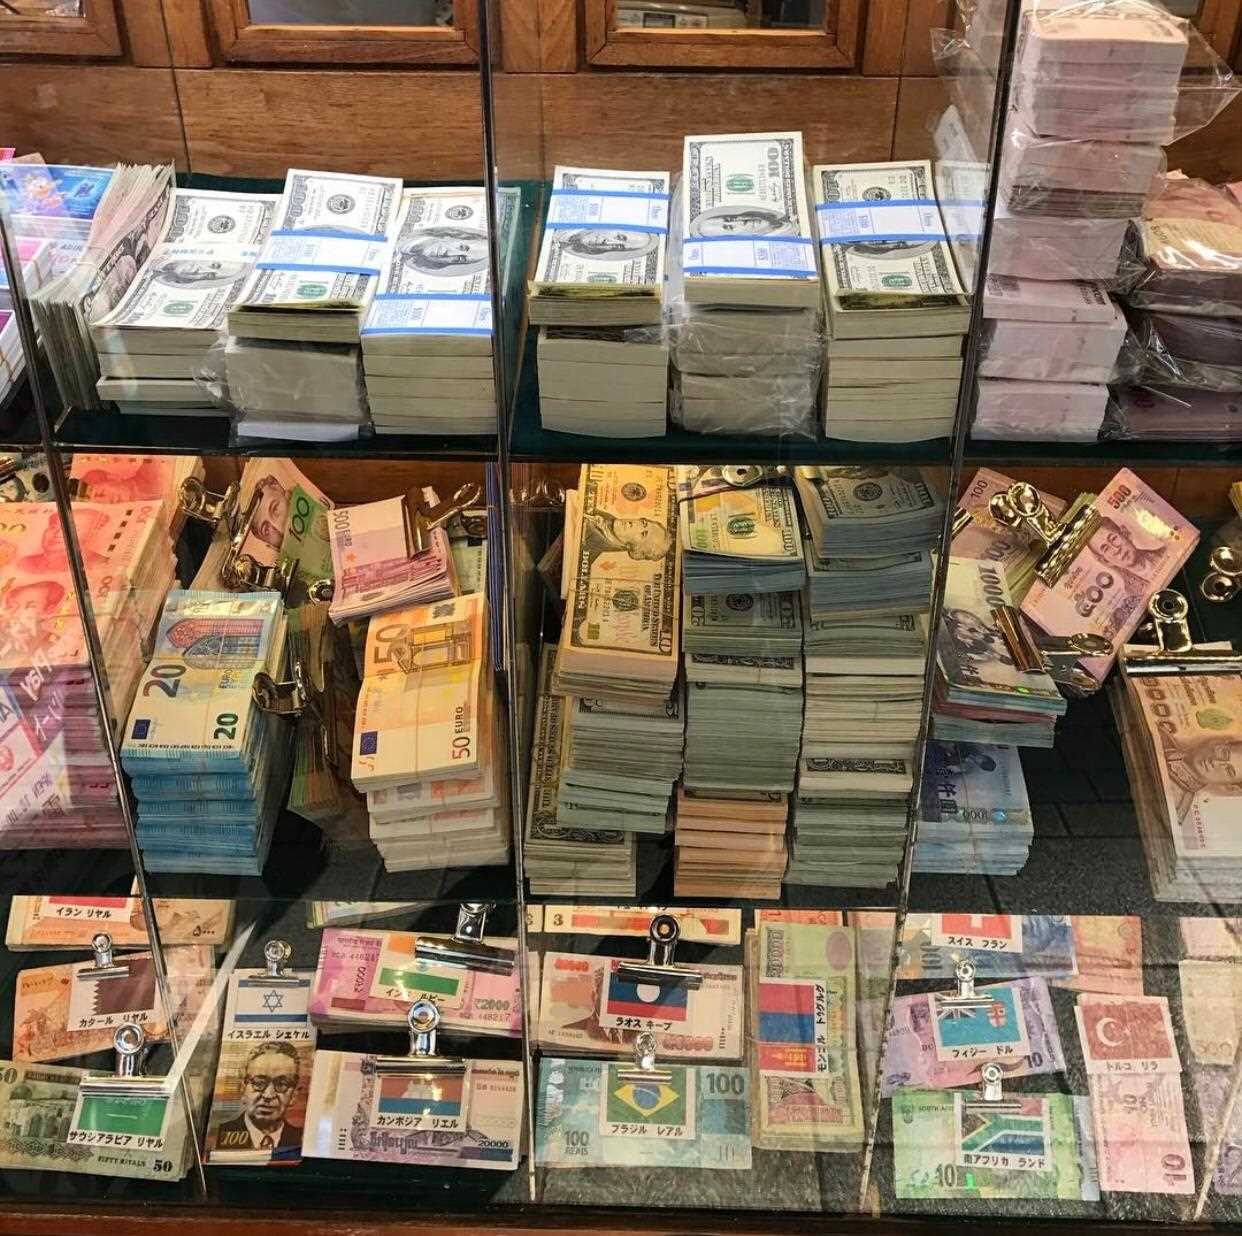 (WhatsApp…. +1(720)5999687)Buy Real Passport Online | Buy counterfeit money  EMAIL documentsglobal801@gmail.com (WhatsApp…. +1(720)5999687)   ((WHATSAPP..+4917647589008))   SKYPE. henrry steve   Buy Drivers License Online Buy registered drivers license online buy Canadian Visa online buy social security number online Buy SSN Online  (WhatsApp…. +1(720)5999687  buy ID cards | Buy Permanent Resident buy driving license online  buy IELTS certificate without exam  Apply for citizenship online  Buy Covid Vaccine Card online  Buy a real Australian passport Buy a diplomatic passport Buy TOEFL certificate online   EMAIL documentsglobal801@gmail.com (WhatsApp…. +1(720)5999687)   ((WHATSAPP..+4917647589008))   SKYPE.    henrry steve   Buy real registered US passports online  Buy real ID cards online  Buy a registered driver's license online Buy real resident permit online  Buy real and fake documents online Buy a genuine passport online Buy registered and unregistered passports online Buy real registered citizenship Bu